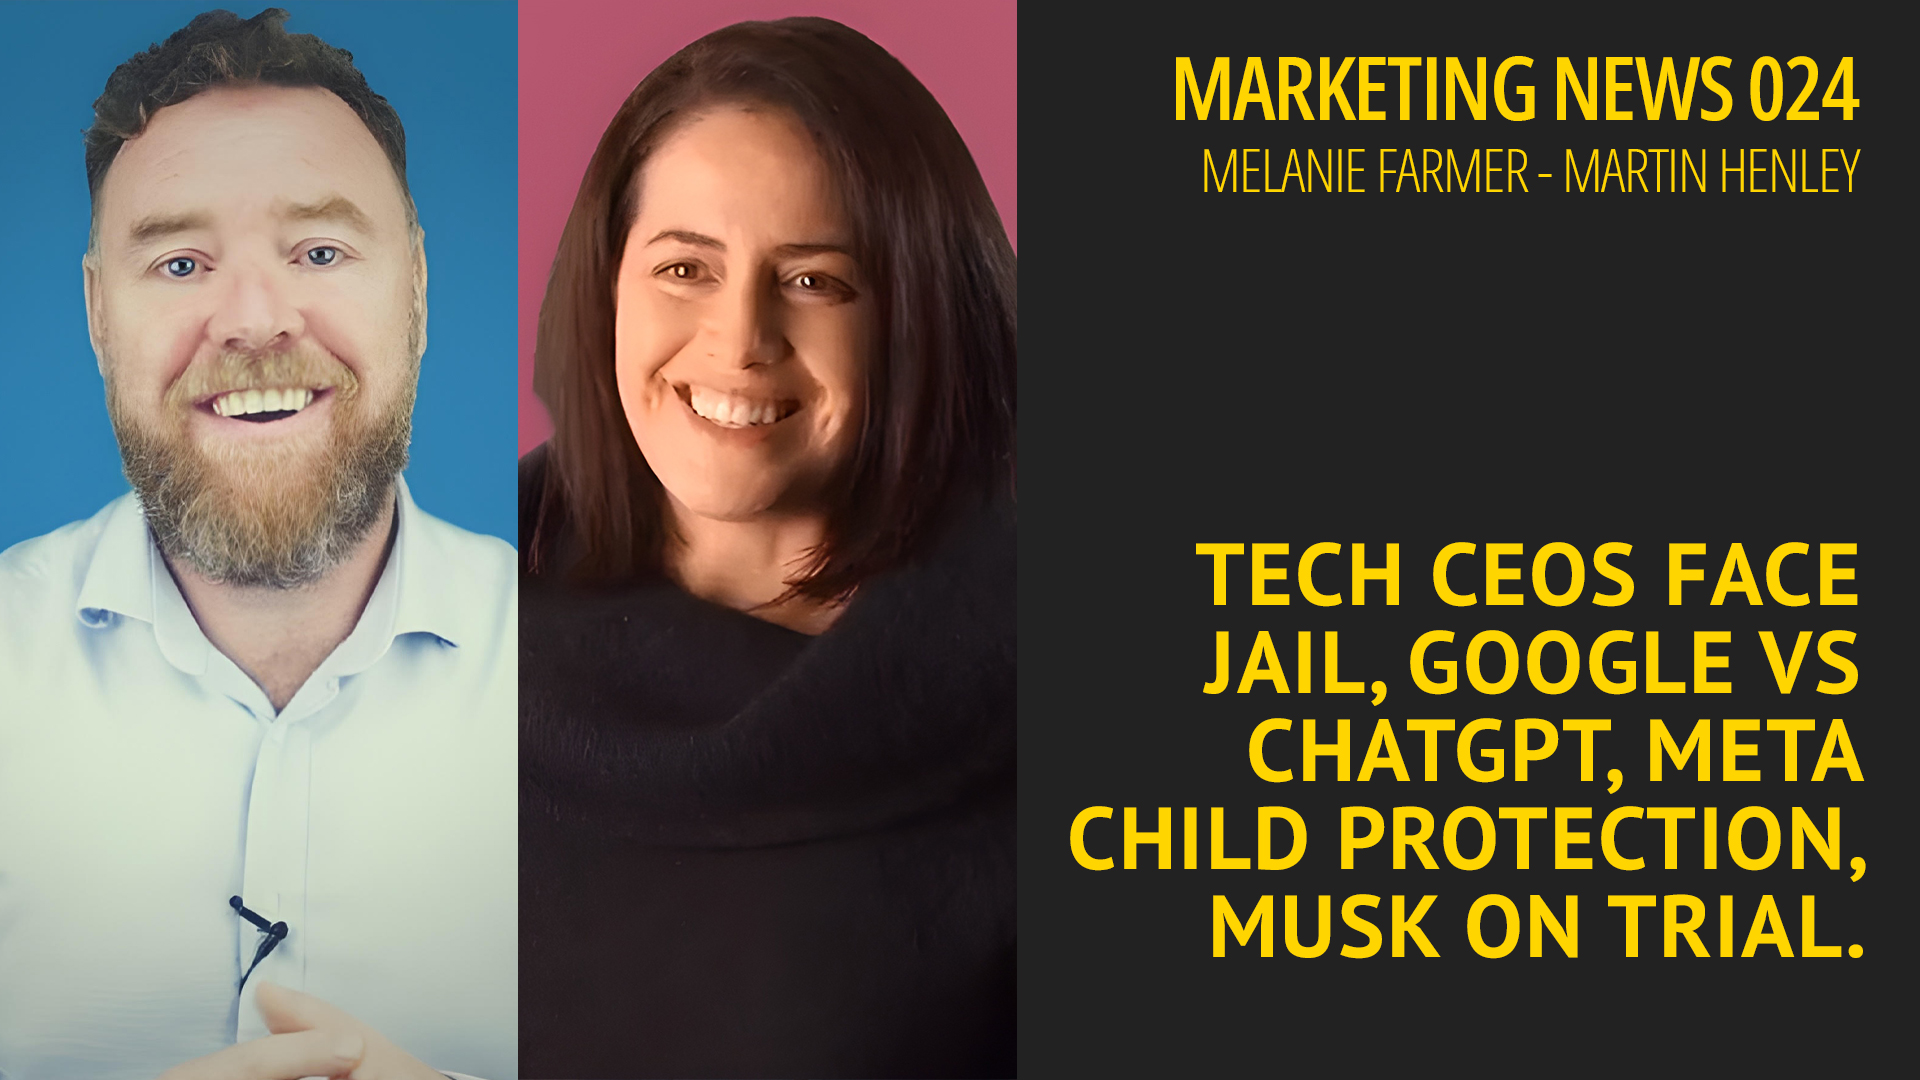 Tech CEOs face jail, Google vs ChatGPT, Meta child protection, Musk on trial – Marketing News 024